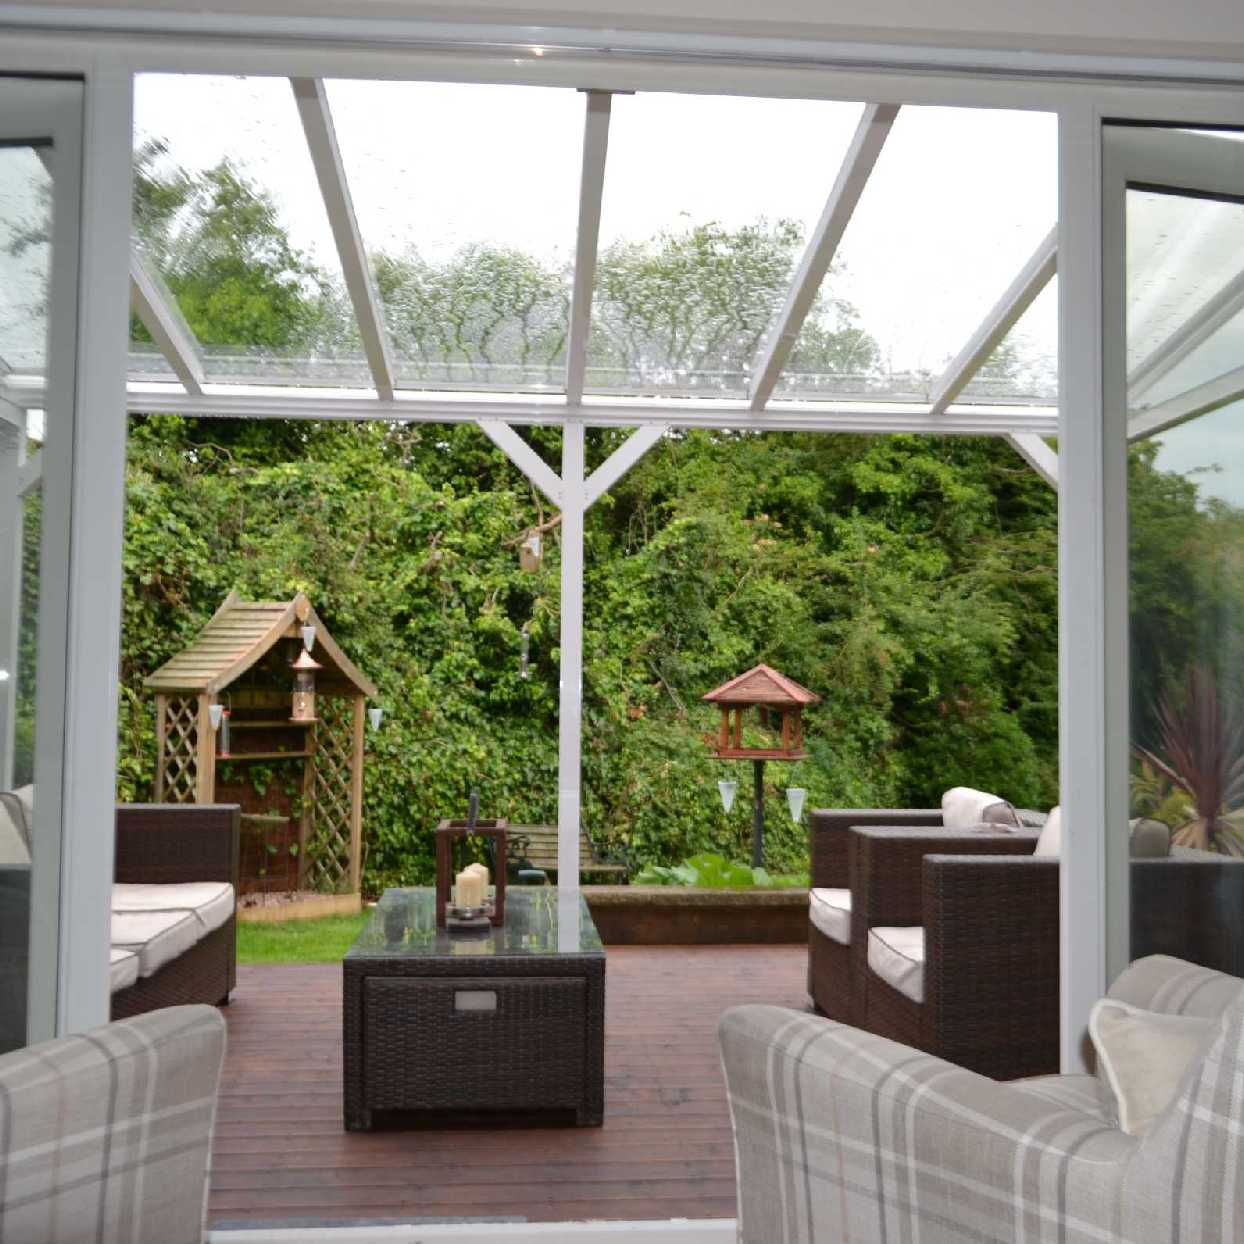 Buy Omega Smart Free-Standing, White MonoPitch Roof Canopy with 6mm Glass Clear Plate Polycarbonate Glazing - 7.0m (W) x 3.5m (P), (8) Supporting Posts online today